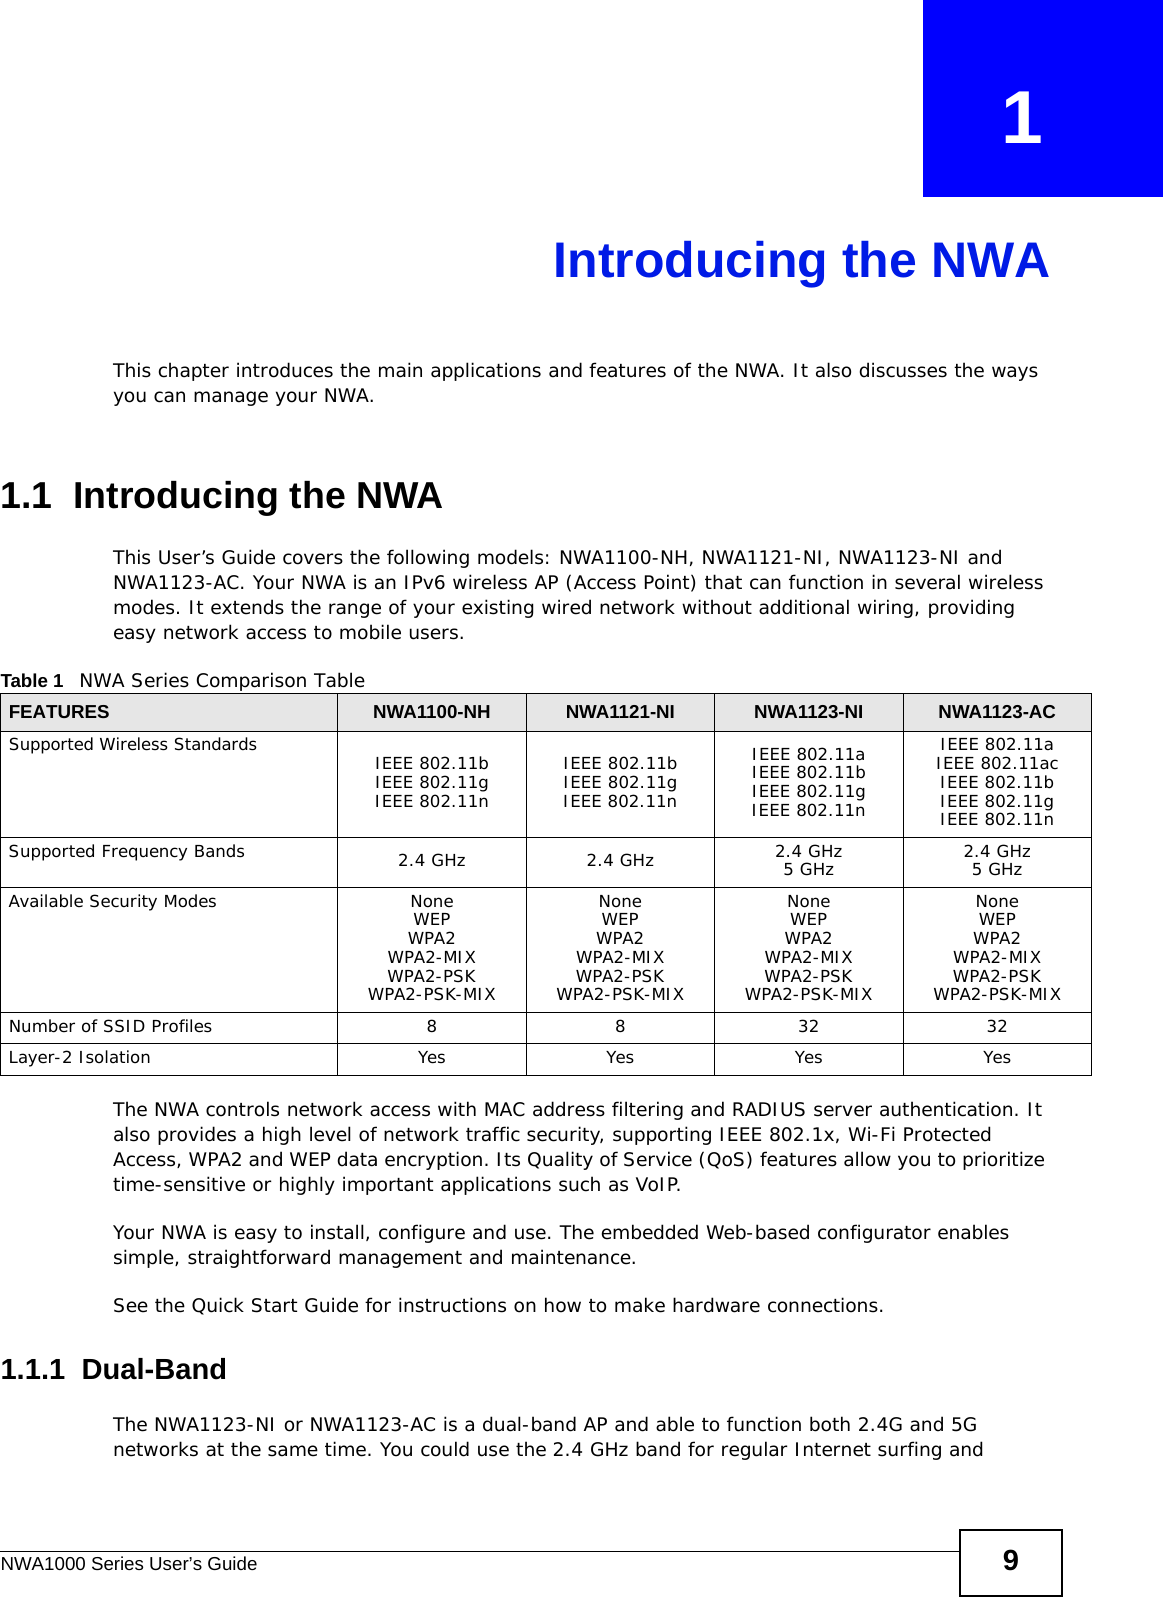 NWA1000 Series User’s Guide 9CHAPTER   1Introducing the NWAThis chapter introduces the main applications and features of the NWA. It also discusses the ways you can manage your NWA.1.1  Introducing the NWA This User’s Guide covers the following models: NWA1100-NH, NWA1121-NI, NWA1123-NI and NWA1123-AC. Your NWA is an IPv6 wireless AP (Access Point) that can function in several wireless modes. It extends the range of your existing wired network without additional wiring, providing easy network access to mobile users. The NWA controls network access with MAC address filtering and RADIUS server authentication. It also provides a high level of network traffic security, supporting IEEE 802.1x, Wi-Fi Protected Access, WPA2 and WEP data encryption. Its Quality of Service (QoS) features allow you to prioritize time-sensitive or highly important applications such as VoIP.Your NWA is easy to install, configure and use. The embedded Web-based configurator enables simple, straightforward management and maintenance.See the Quick Start Guide for instructions on how to make hardware connections.1.1.1  Dual-BandThe NWA1123-NI or NWA1123-AC is a dual-band AP and able to function both 2.4G and 5G networks at the same time. You could use the 2.4 GHz band for regular Internet surfing and Table 1   NWA Series Comparison TableFEATURES NWA1100-NH NWA1121-NI NWA1123-NI NWA1123-ACSupported Wireless StandardsIEEE 802.11bIEEE 802.11gIEEE 802.11nIEEE 802.11bIEEE 802.11gIEEE 802.11nIEEE 802.11aIEEE 802.11bIEEE 802.11gIEEE 802.11nIEEE 802.11aIEEE 802.11acIEEE 802.11bIEEE 802.11gIEEE 802.11nSupported Frequency Bands 2.4 GHz 2.4 GHz 2.4 GHz5 GHz 2.4 GHz5 GHzAvailable Security Modes NoneWEPWPA2WPA2-MIXWPA2-PSKWPA2-PSK-MIXNoneWEPWPA2WPA2-MIXWPA2-PSKWPA2-PSK-MIXNoneWEPWPA2WPA2-MIXWPA2-PSKWPA2-PSK-MIXNoneWEPWPA2WPA2-MIXWPA2-PSKWPA2-PSK-MIXNumber of SSID Profiles 8 8 32 32Layer-2 Isolation Yes Yes Yes Yes